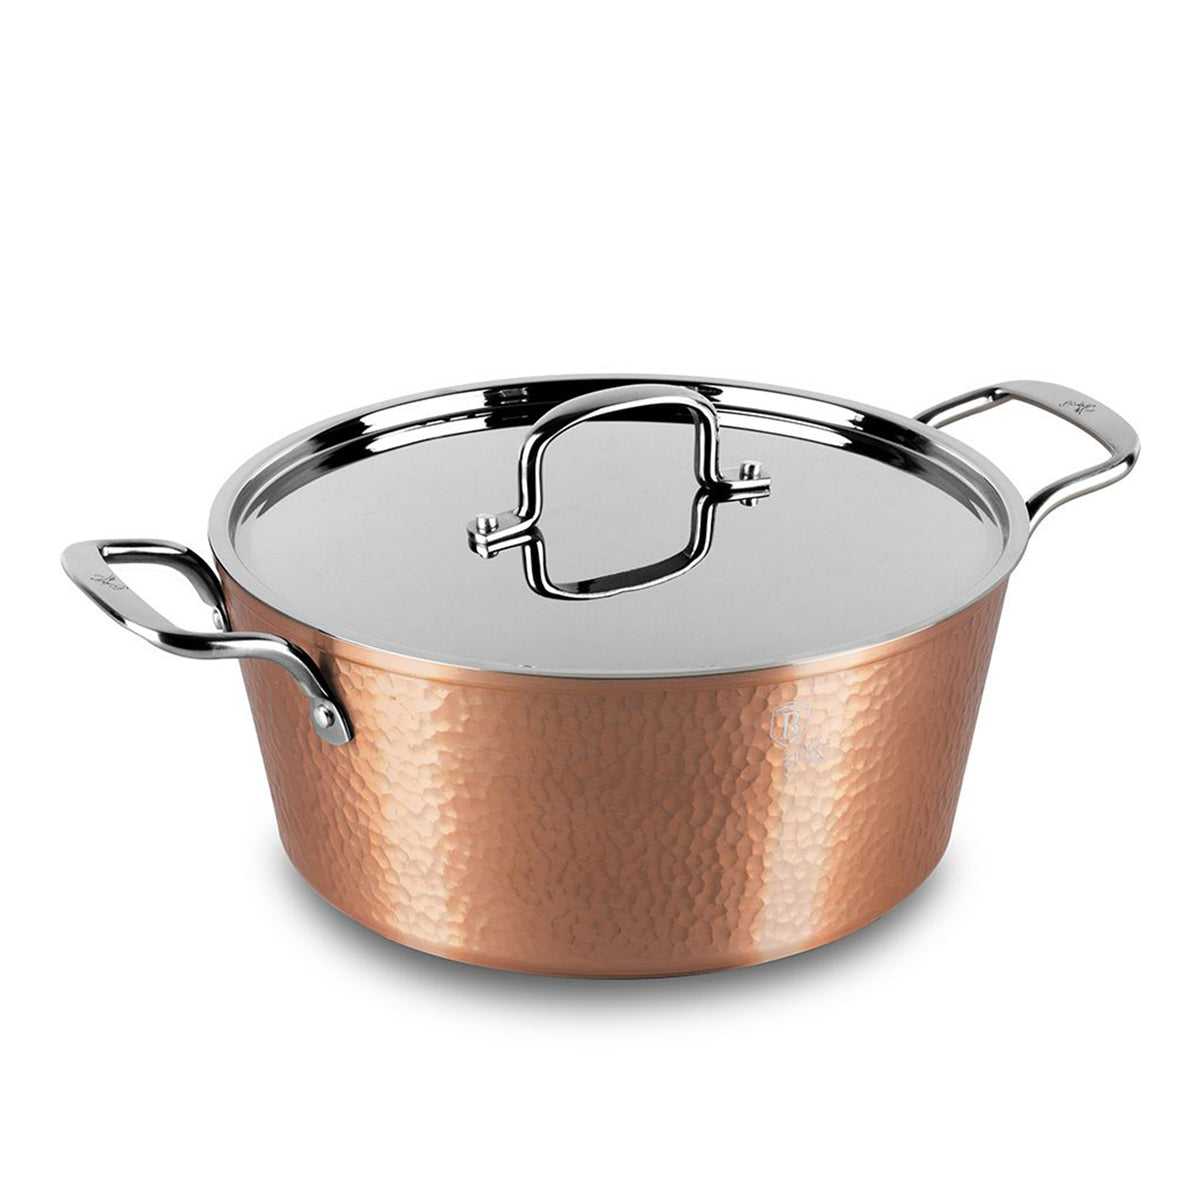 Hammered casserole with stainless steel lid and handles size 30 cm copper color